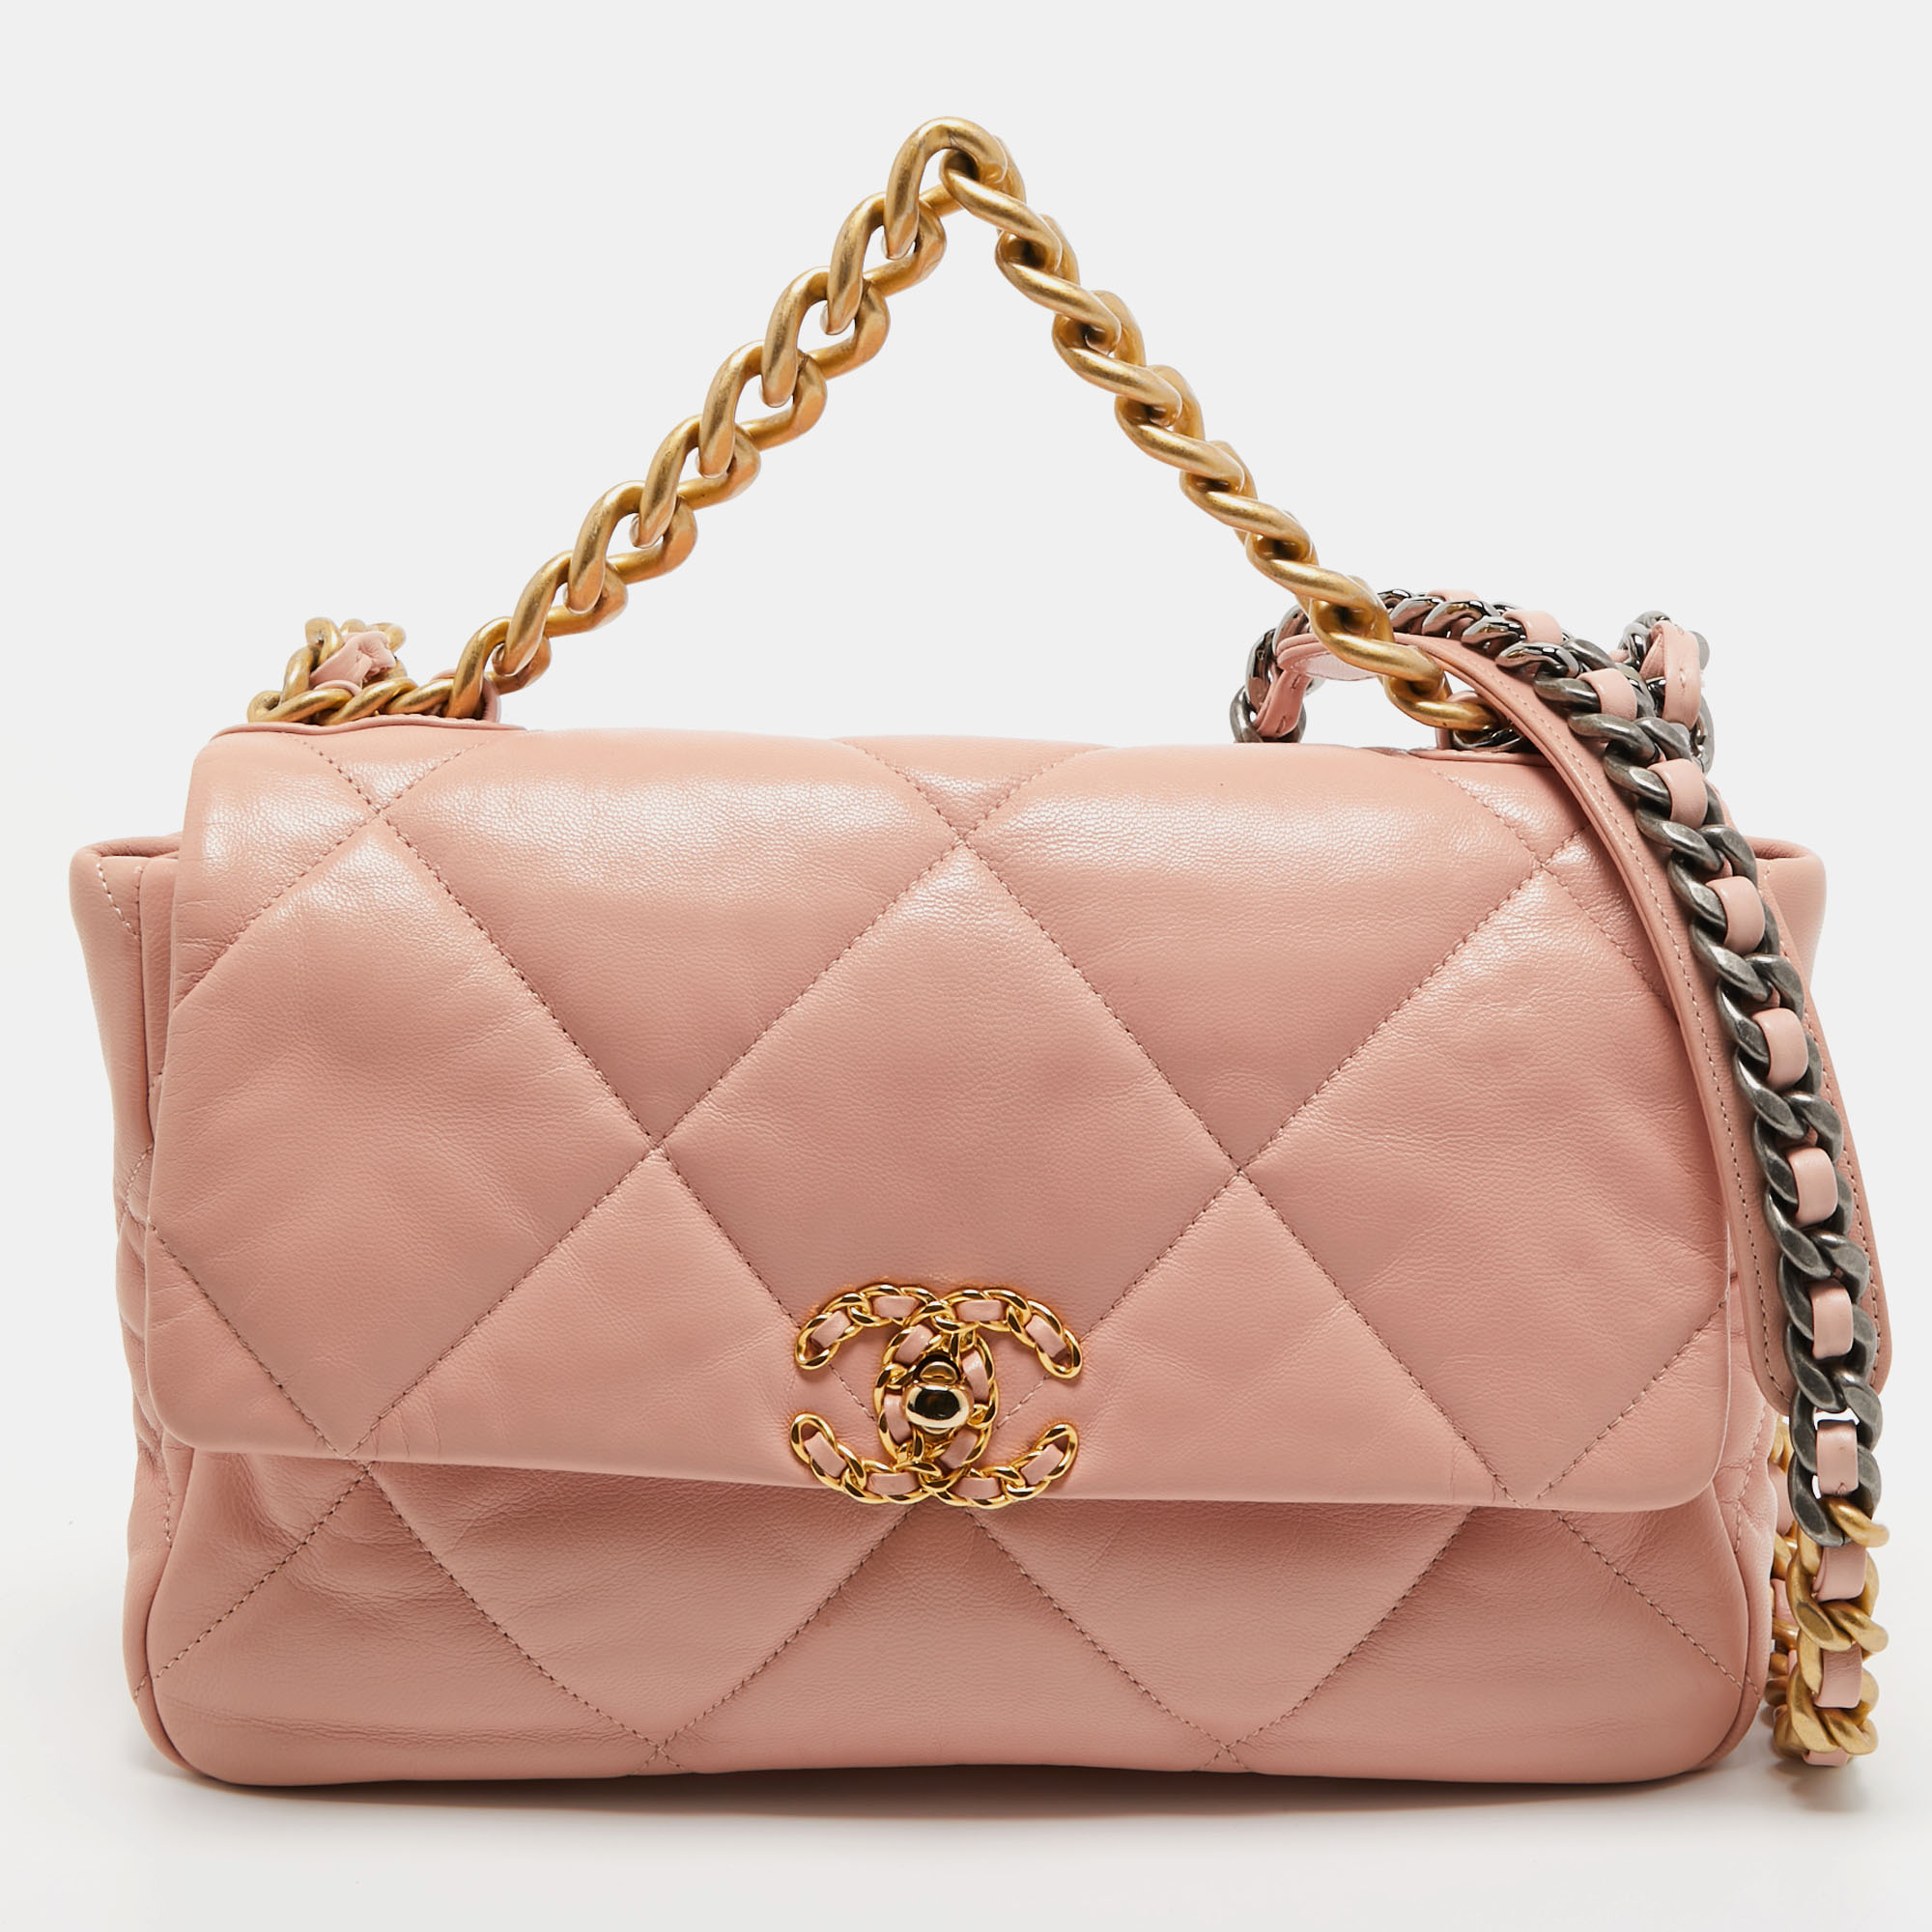 Pre-owned Chanel Pink Quilted Leather Large 19 Flap Bag